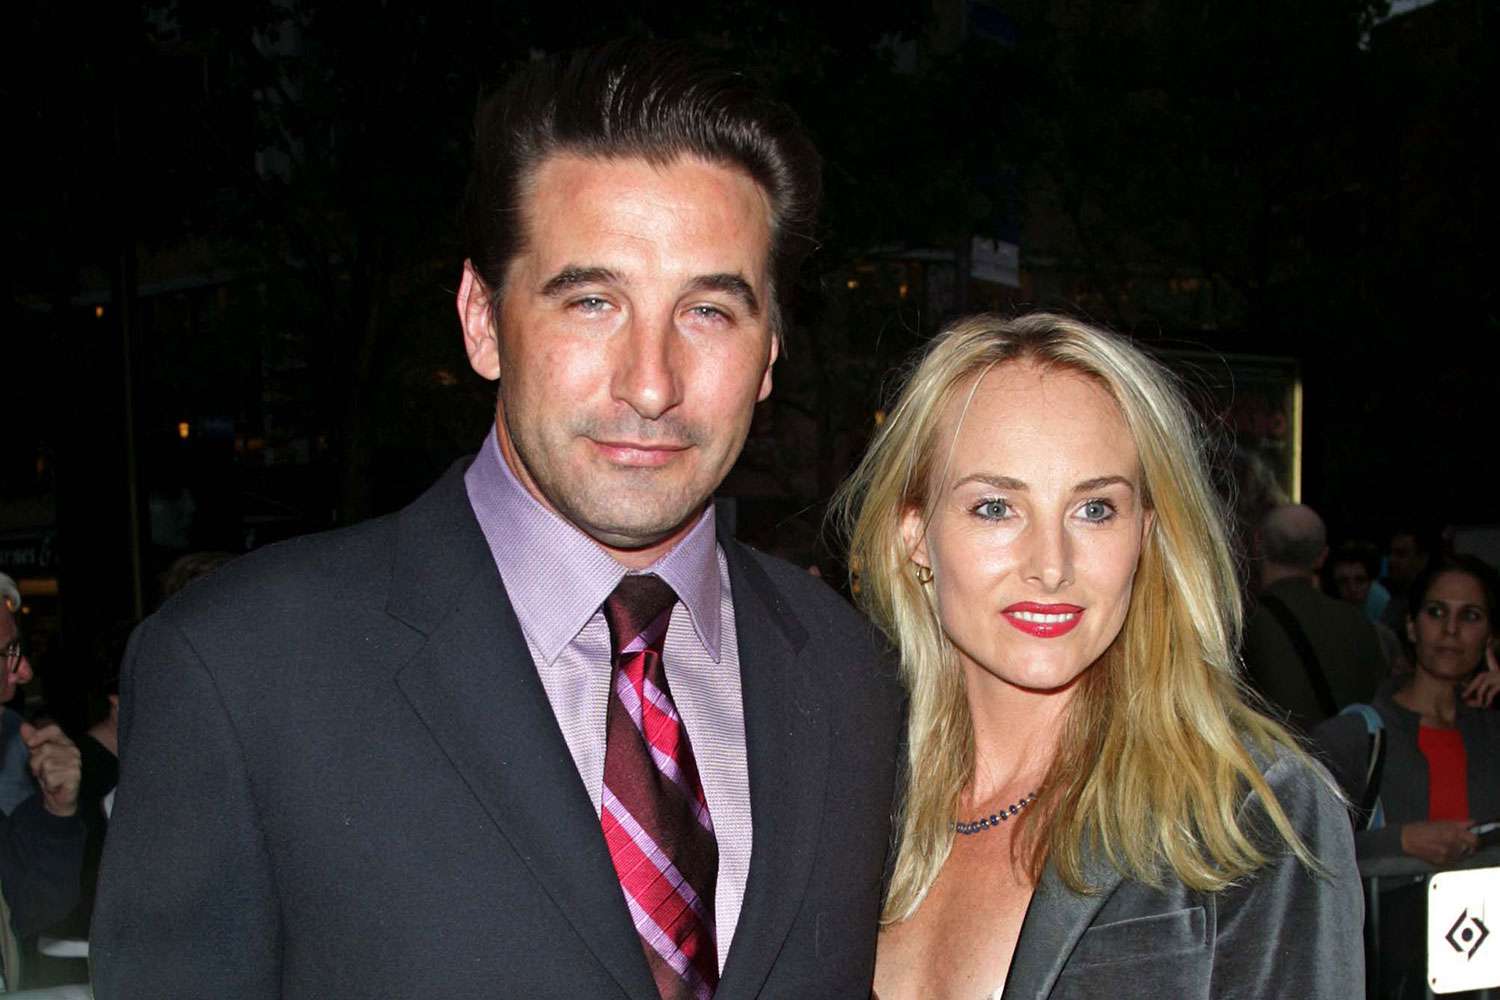 Billy Baldwin Opens Up About His True Feelings Regarding Chynna Phillips Sharing Their Family’s Private Matters Publicly